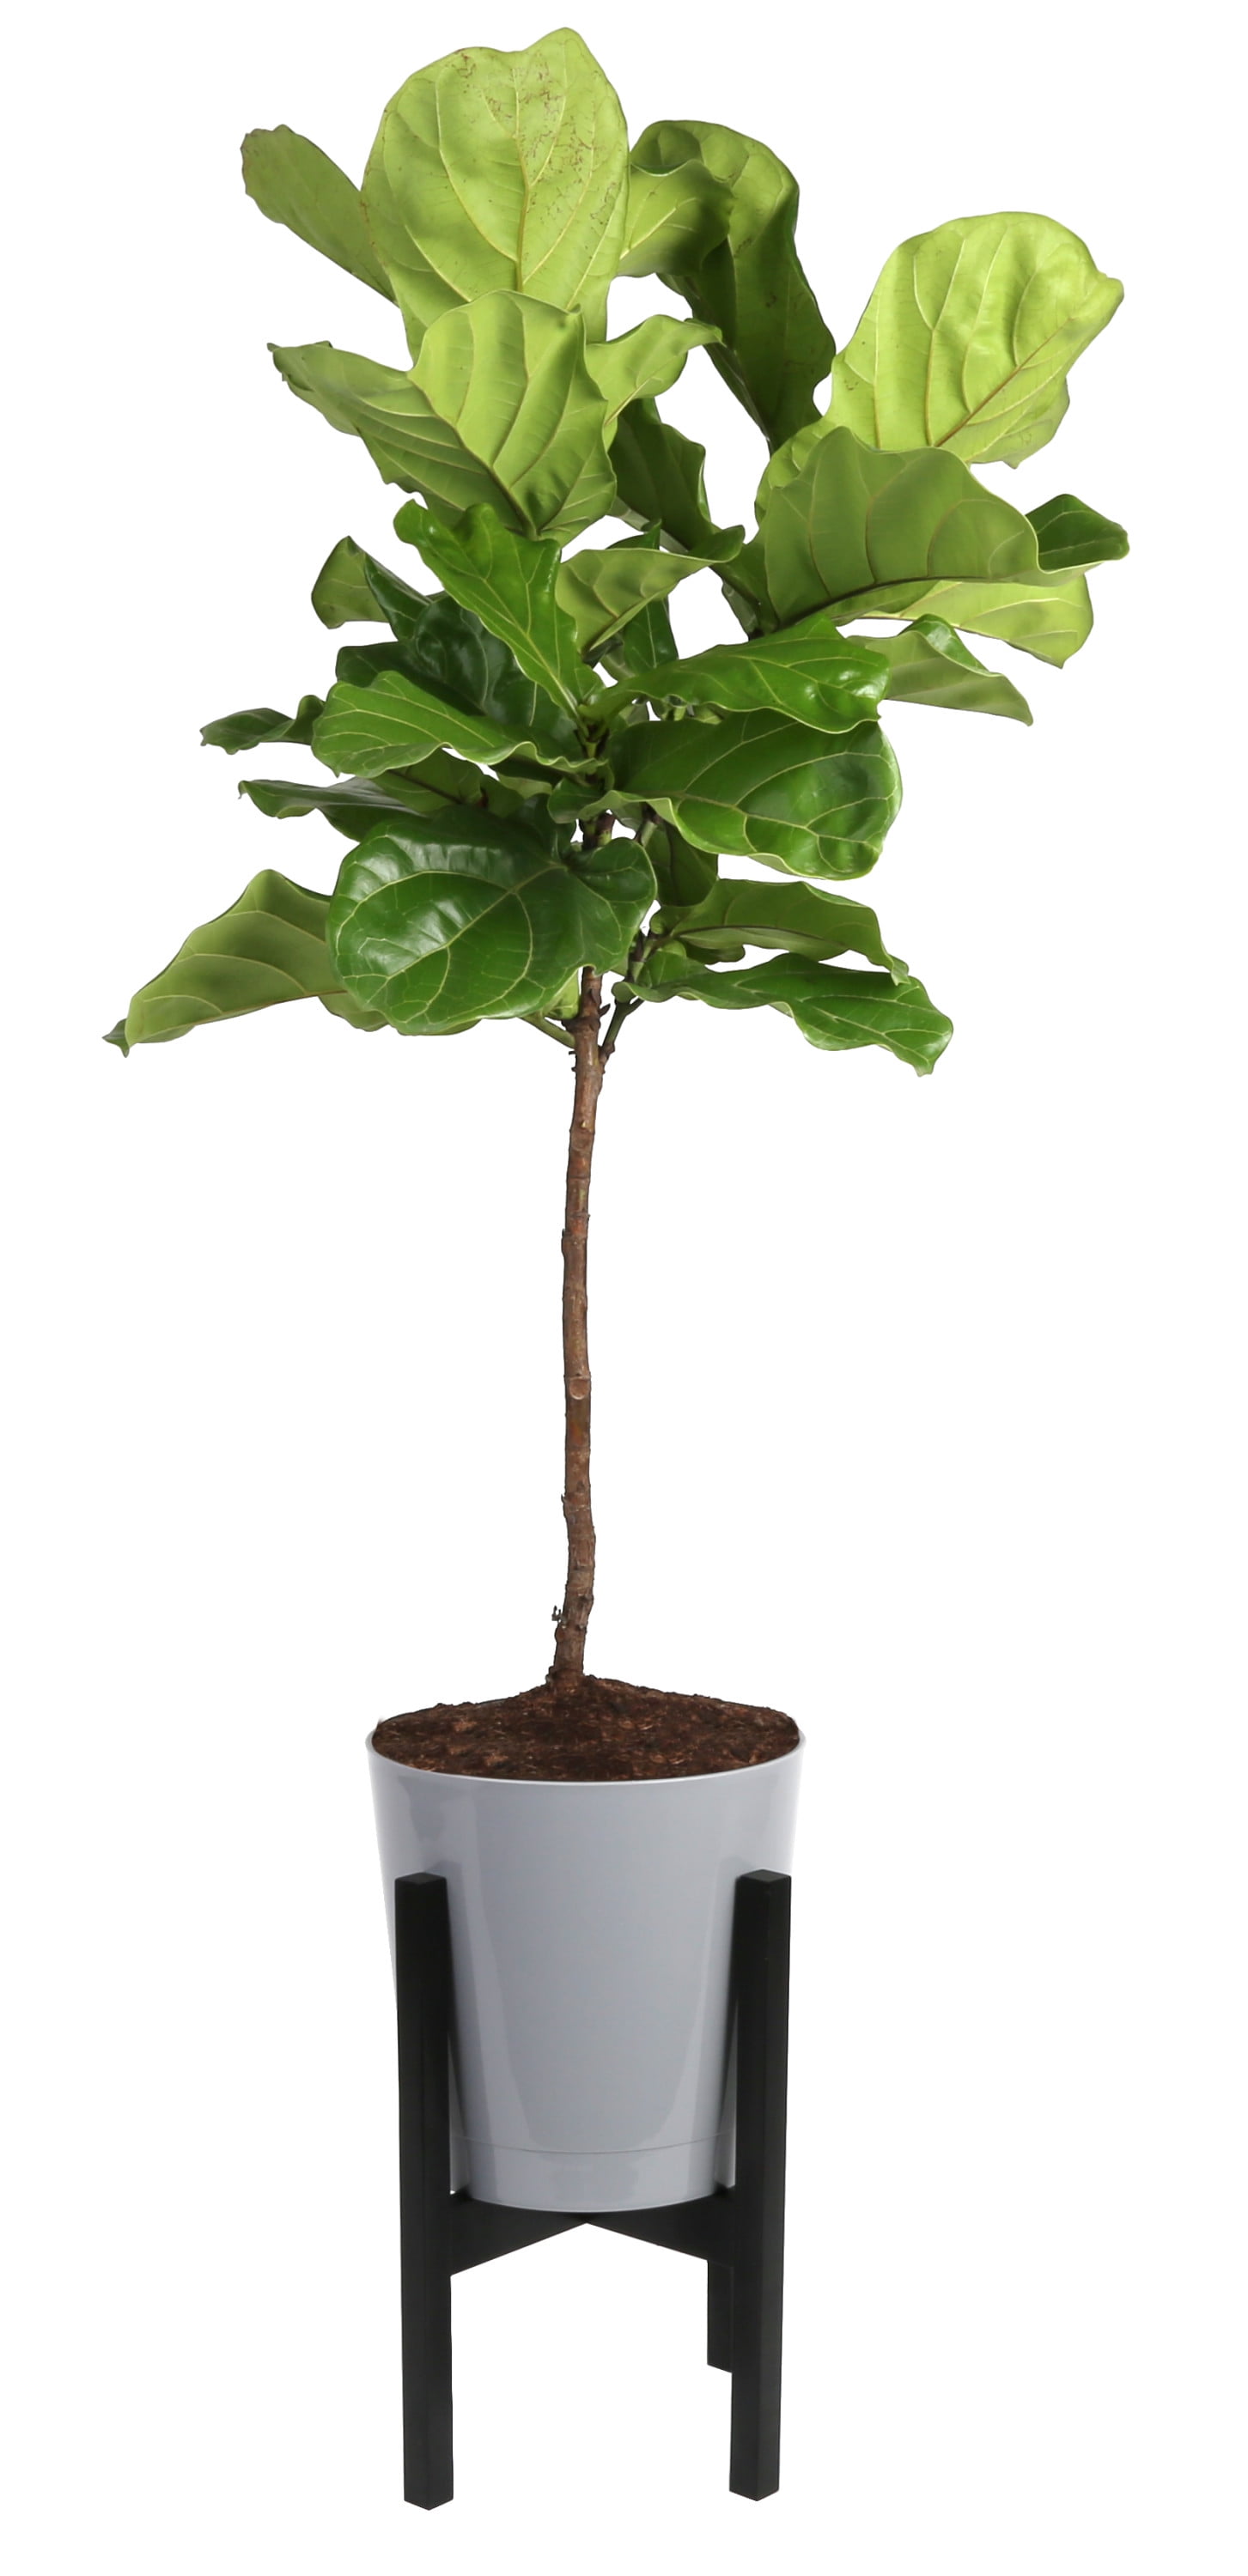 Costa Farms Live Indoor 3 To 4 Feet Tall Green Fiddle Leaf Fig Bright Indirect Sunlight Plant